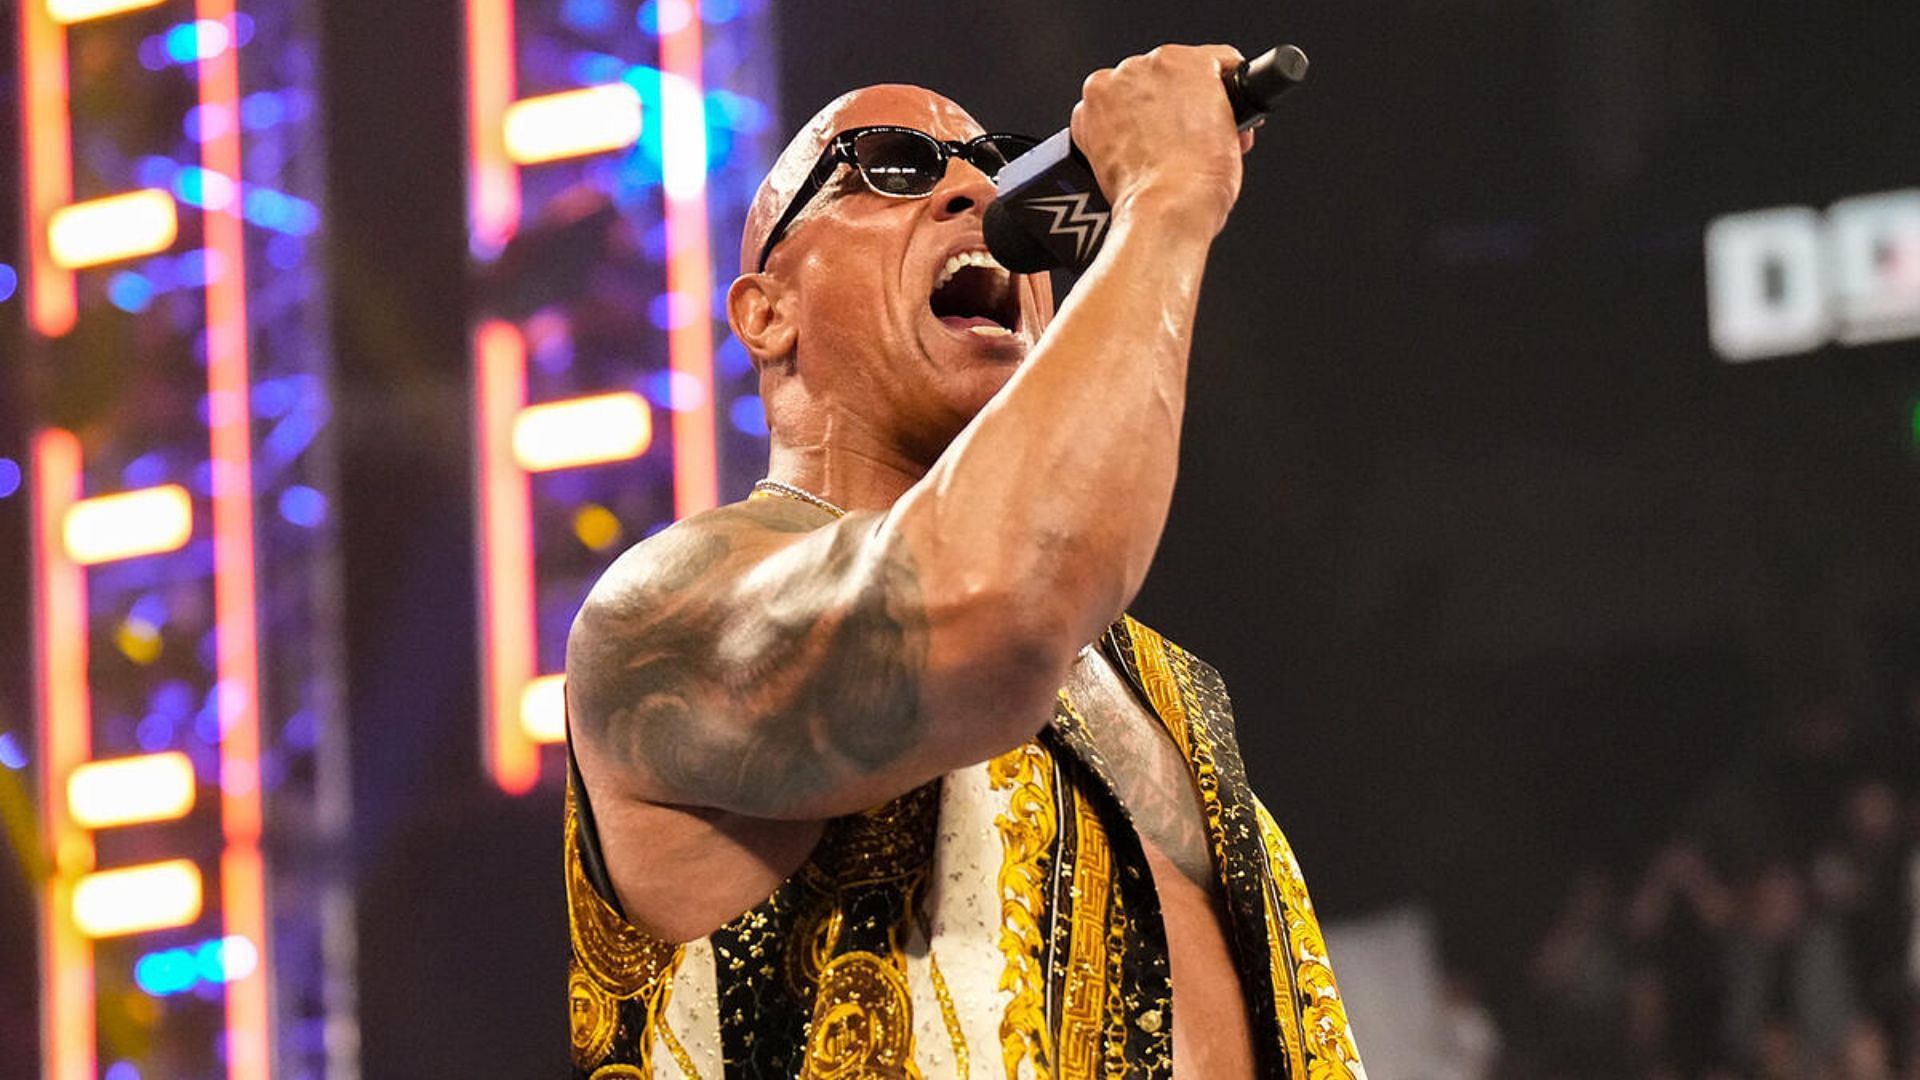 The Rock is playing a huge role in WWE